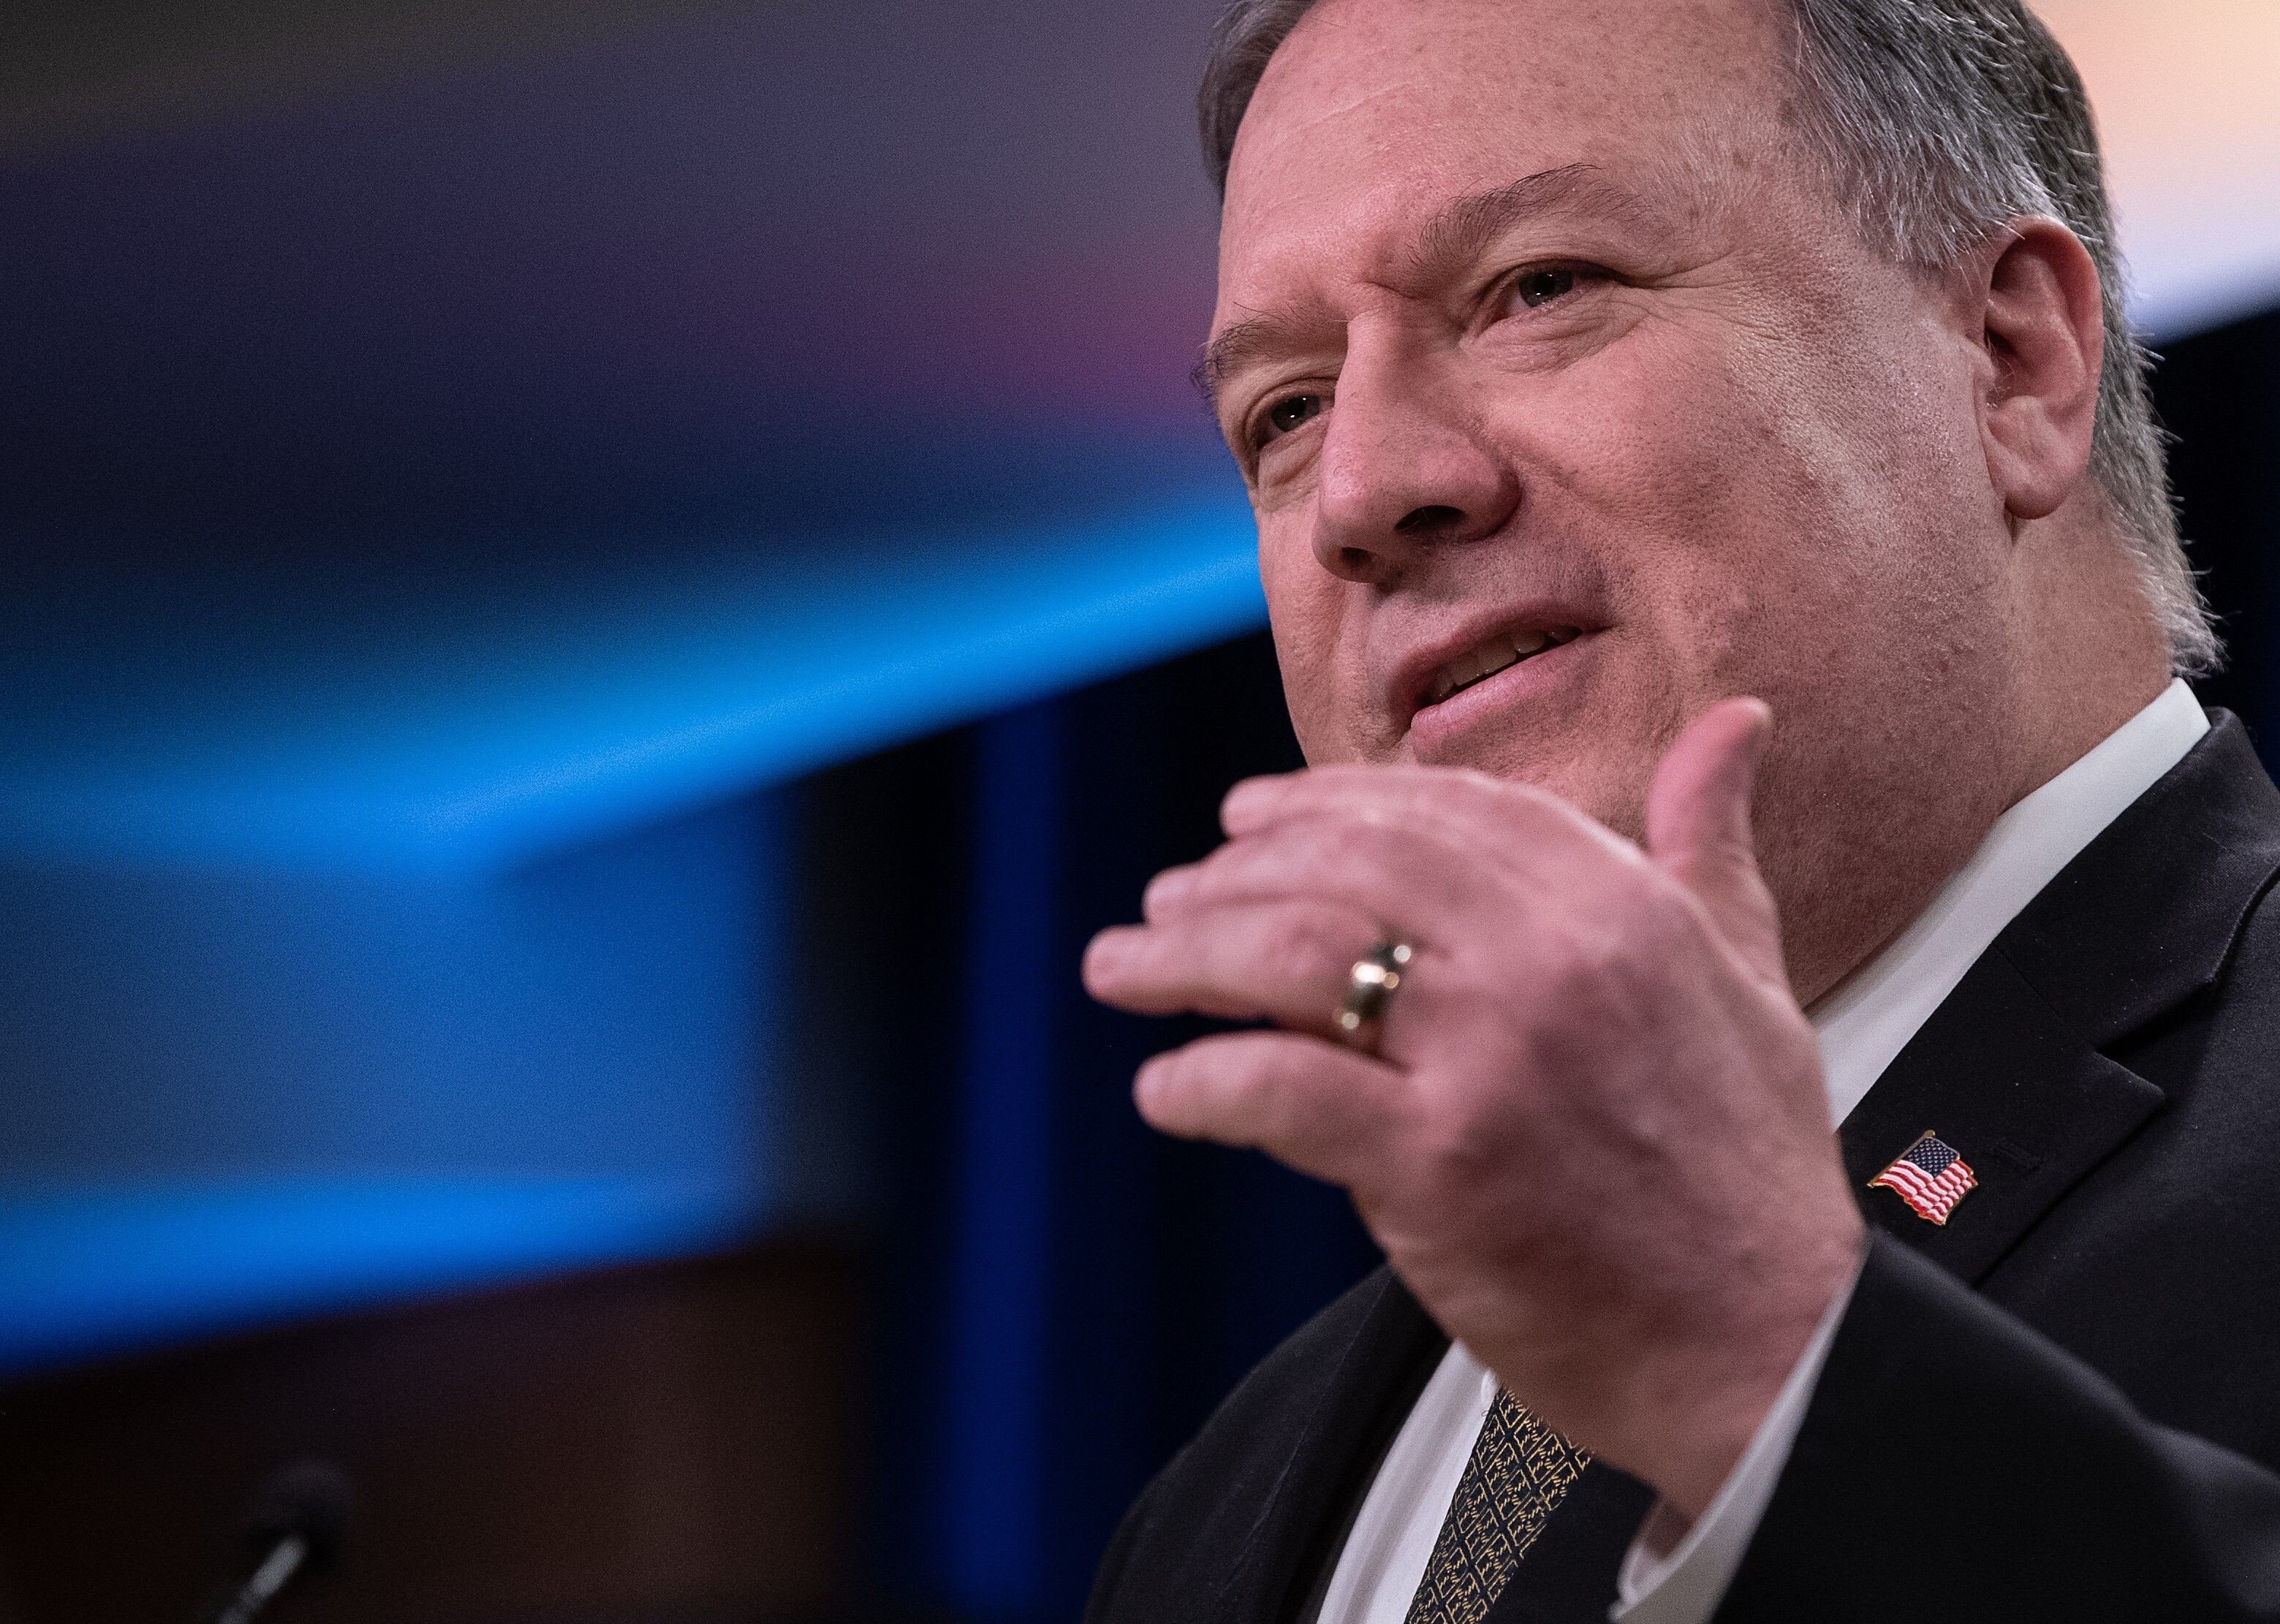 US Secretary of State Mike Pompeo has doubled down on US claims that it has “enormous evidence” showing the novel coronavirus originated in a lab in China, further fuelling tensions with Beijing over its handling of the outbreak. Photo: AFP